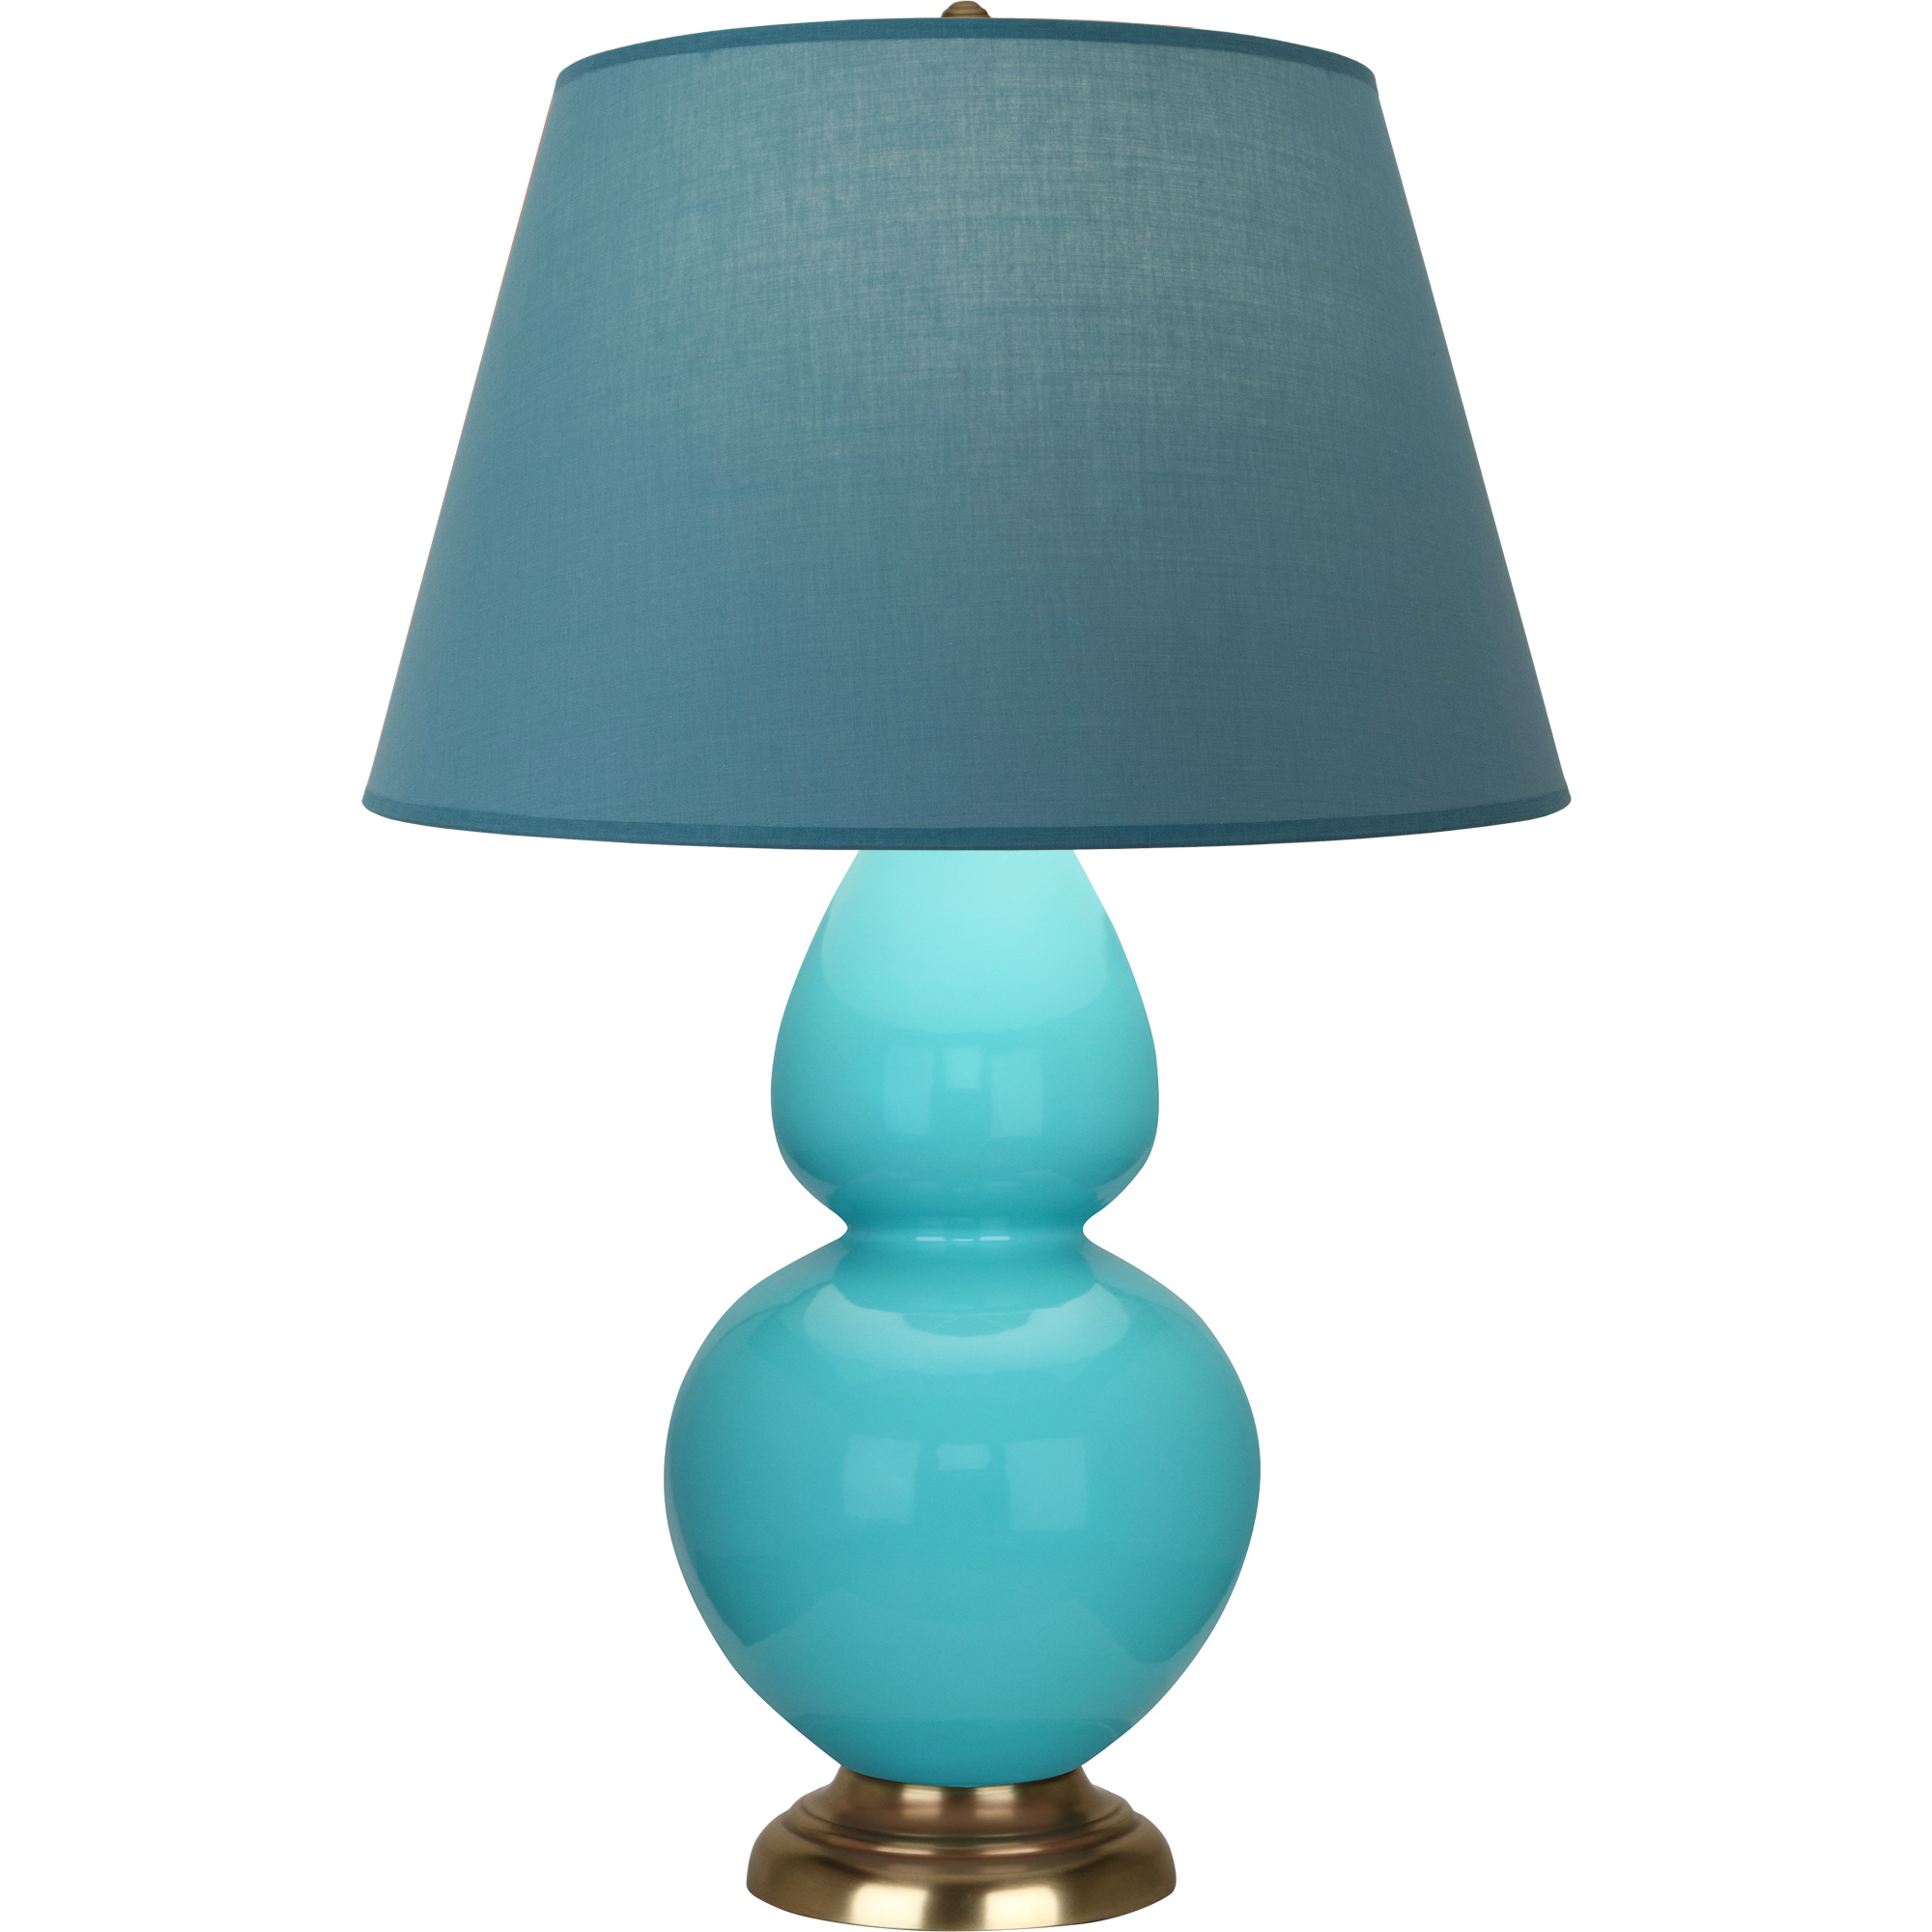 Double Gourd Table Lamp Style #1740B